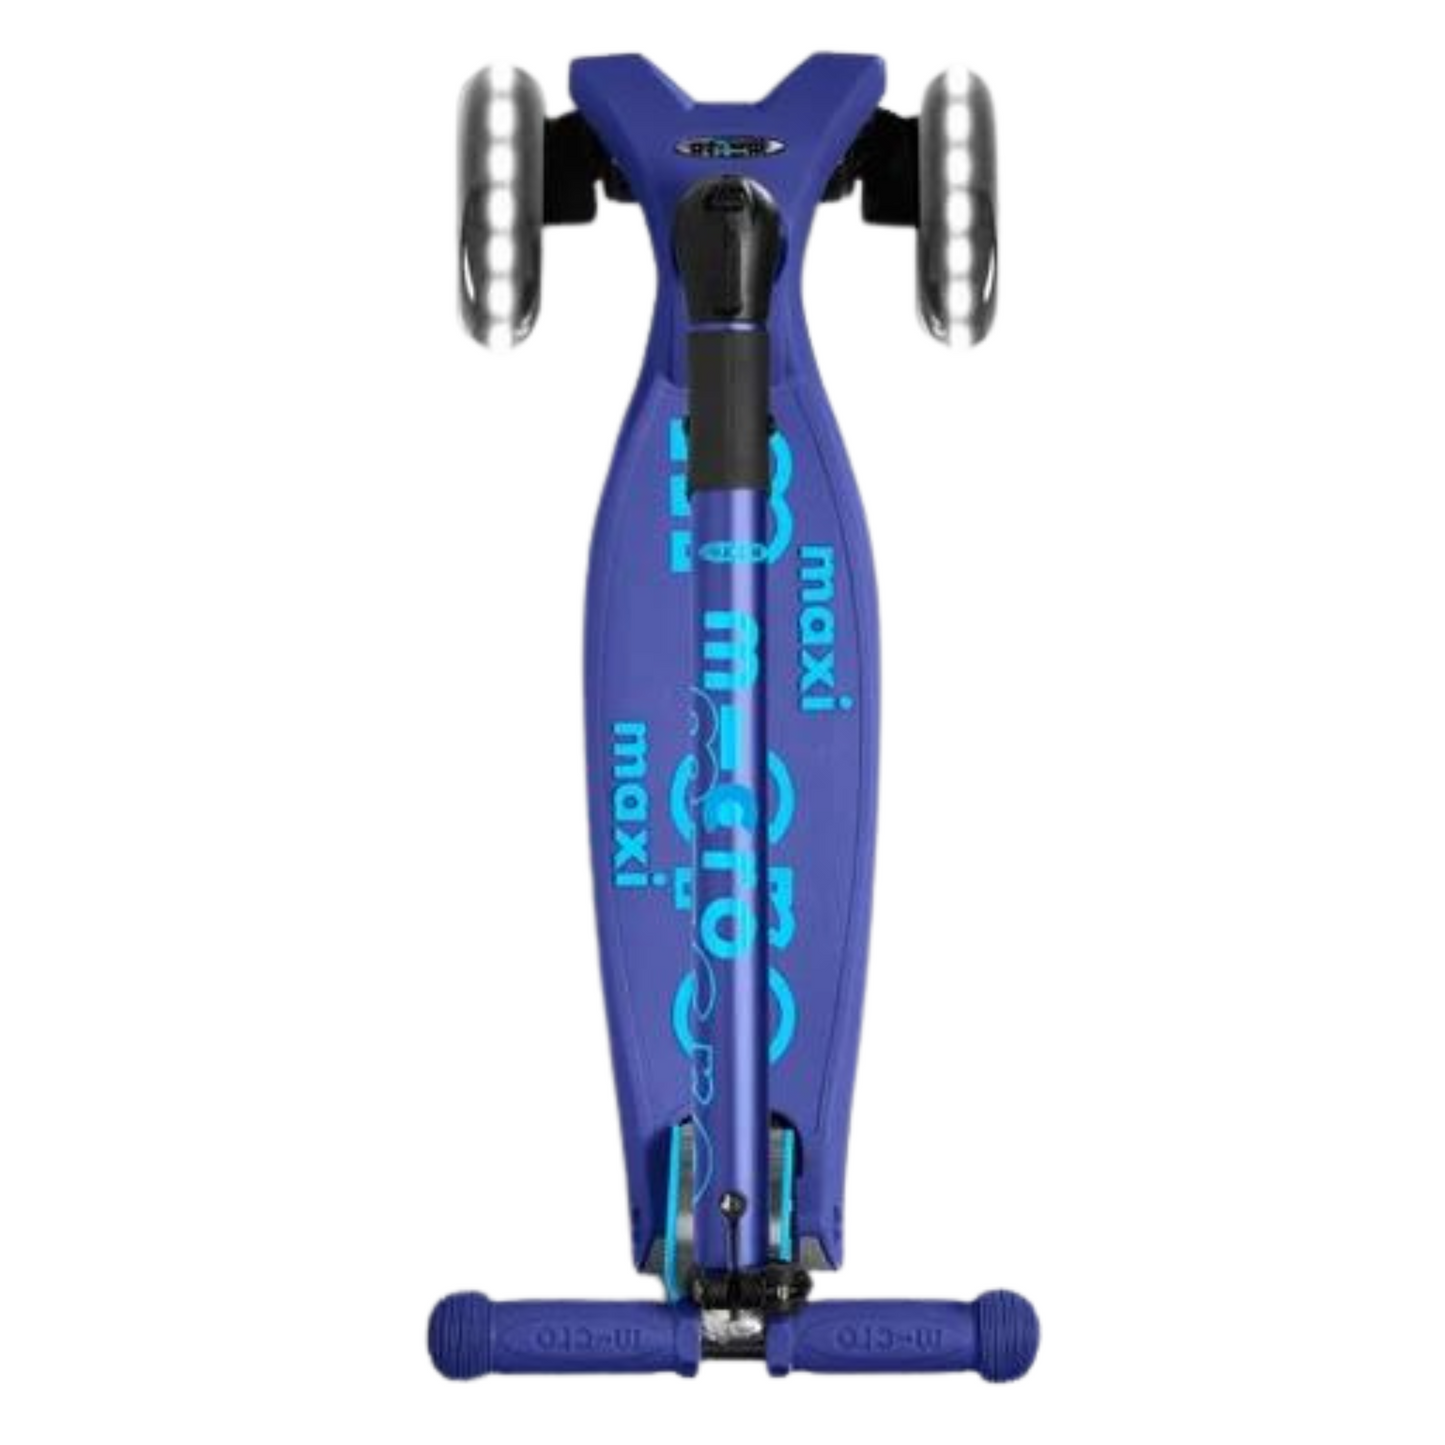 Maxi Micro Scooter Deluxe Foldable LED: Navy